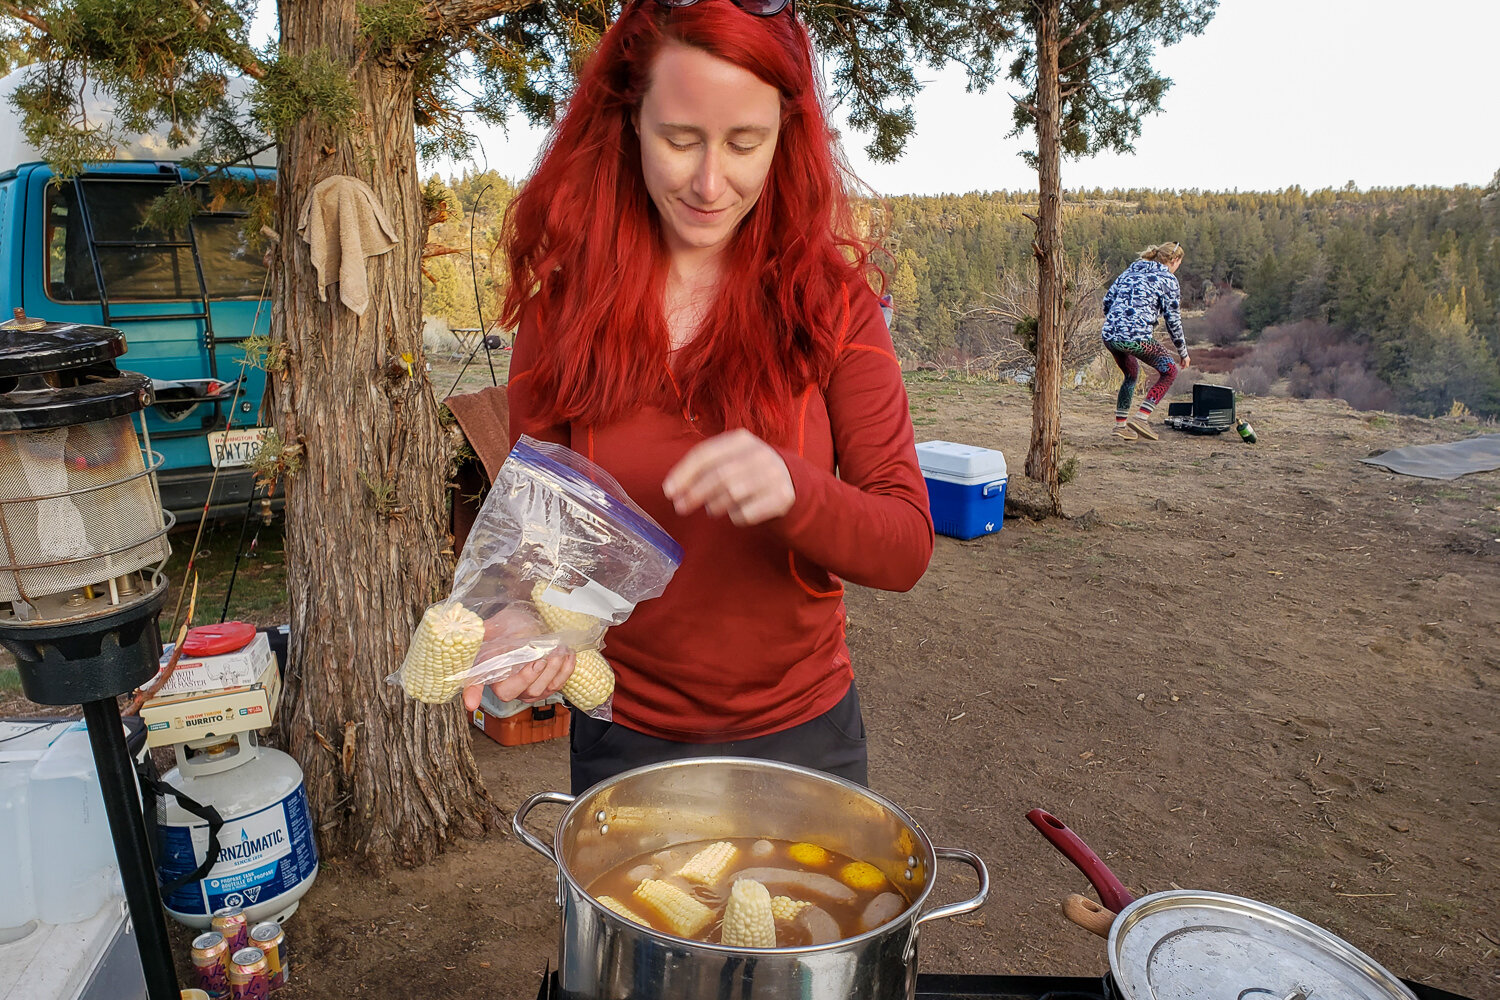 To make things easier, you can prep low-boil ingredients at home & simply add them to the pot in the campsite